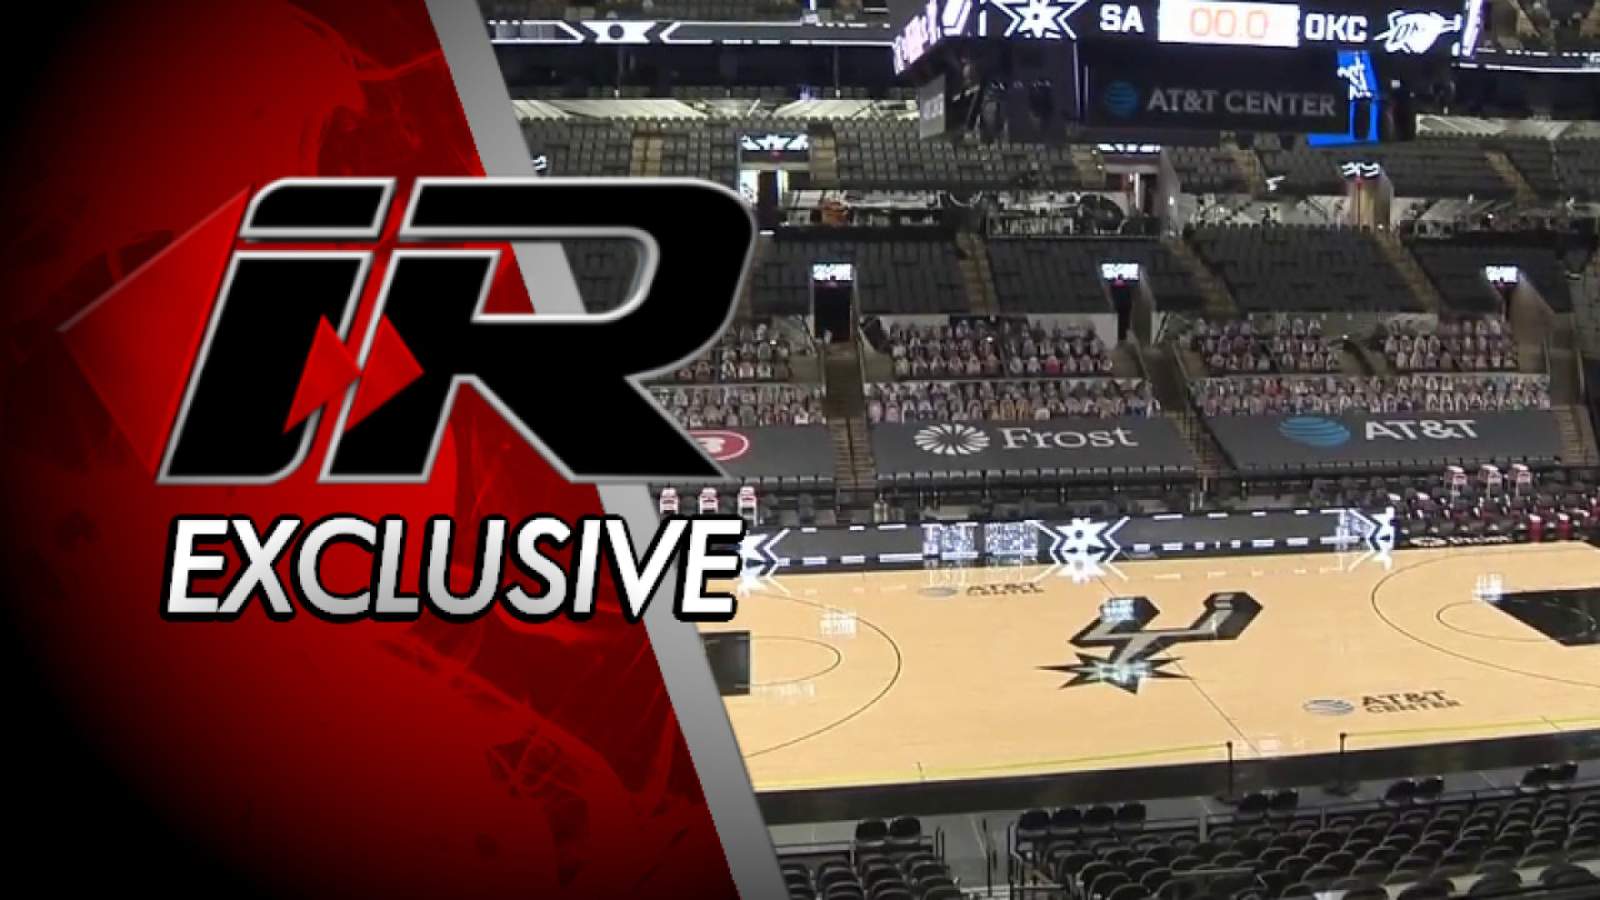 FEATURE: Greg Simmons gets exclusive tour of AT&T Center’s new touchless fan experience